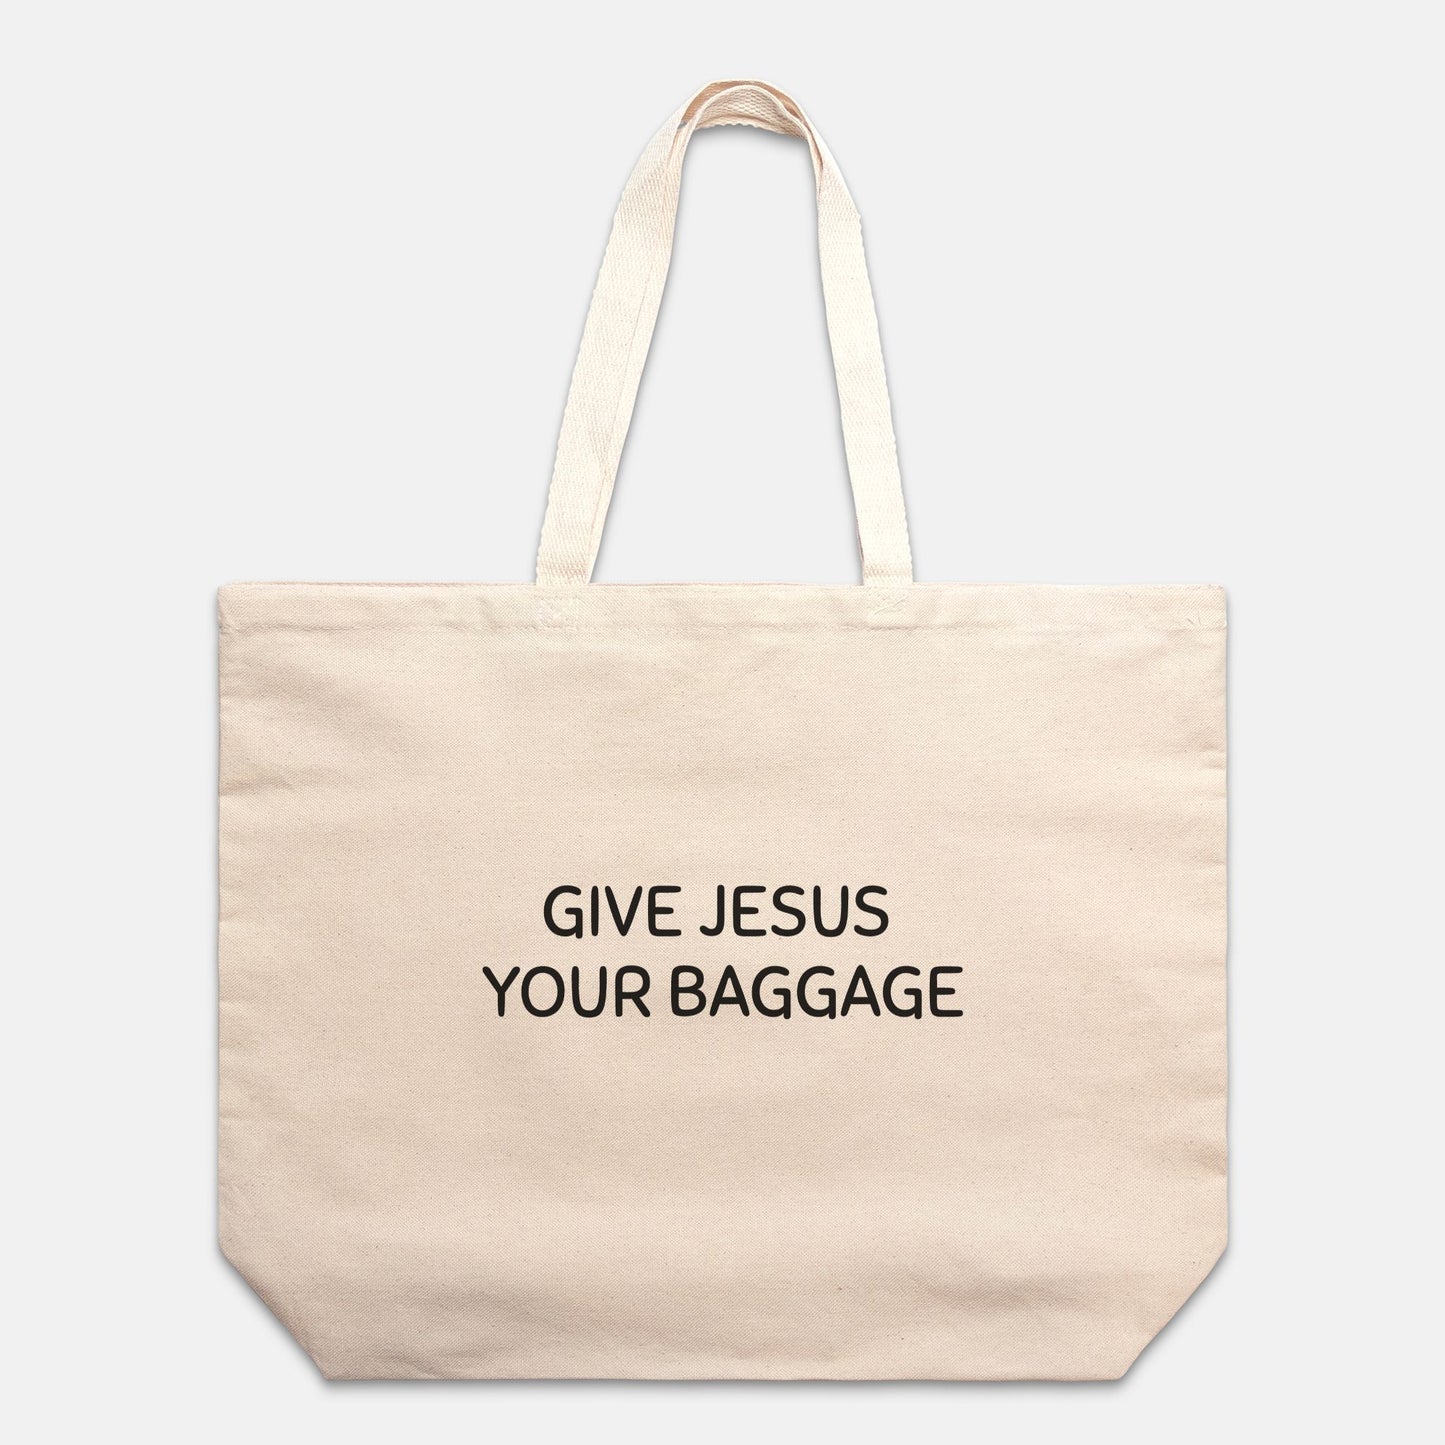 Give Jesus Your Bagged Oversized Natural Cotton Canvas Tote Bag